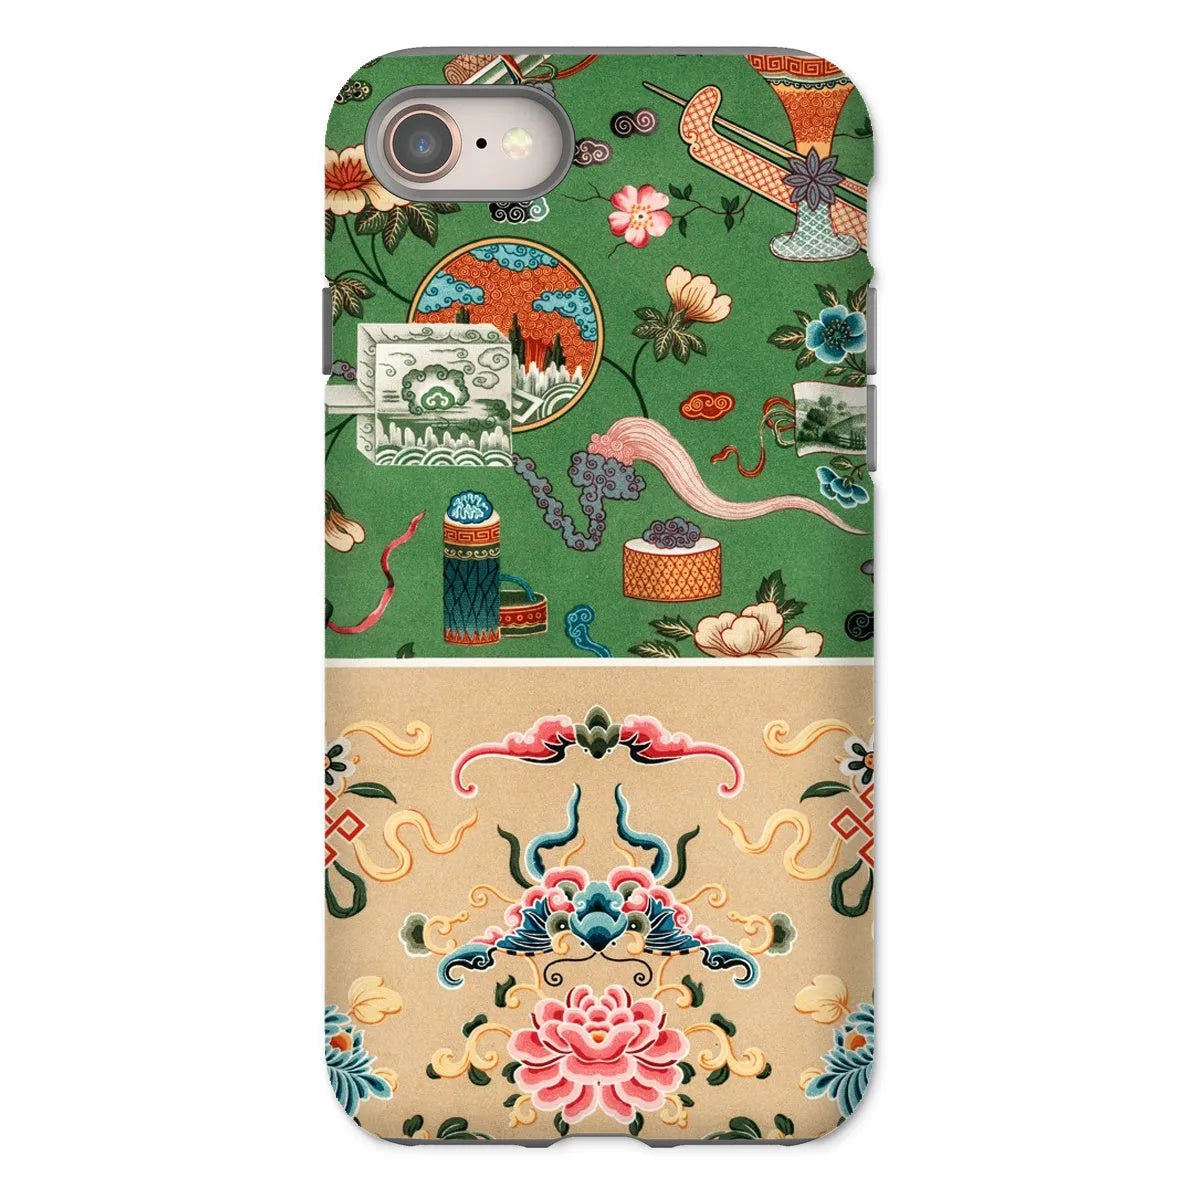 This Chinese Pattern By Auguste Racinet Tough Phone Case - Iphone 8 / Matte - Mobile Phone Cases - Aesthetic Art